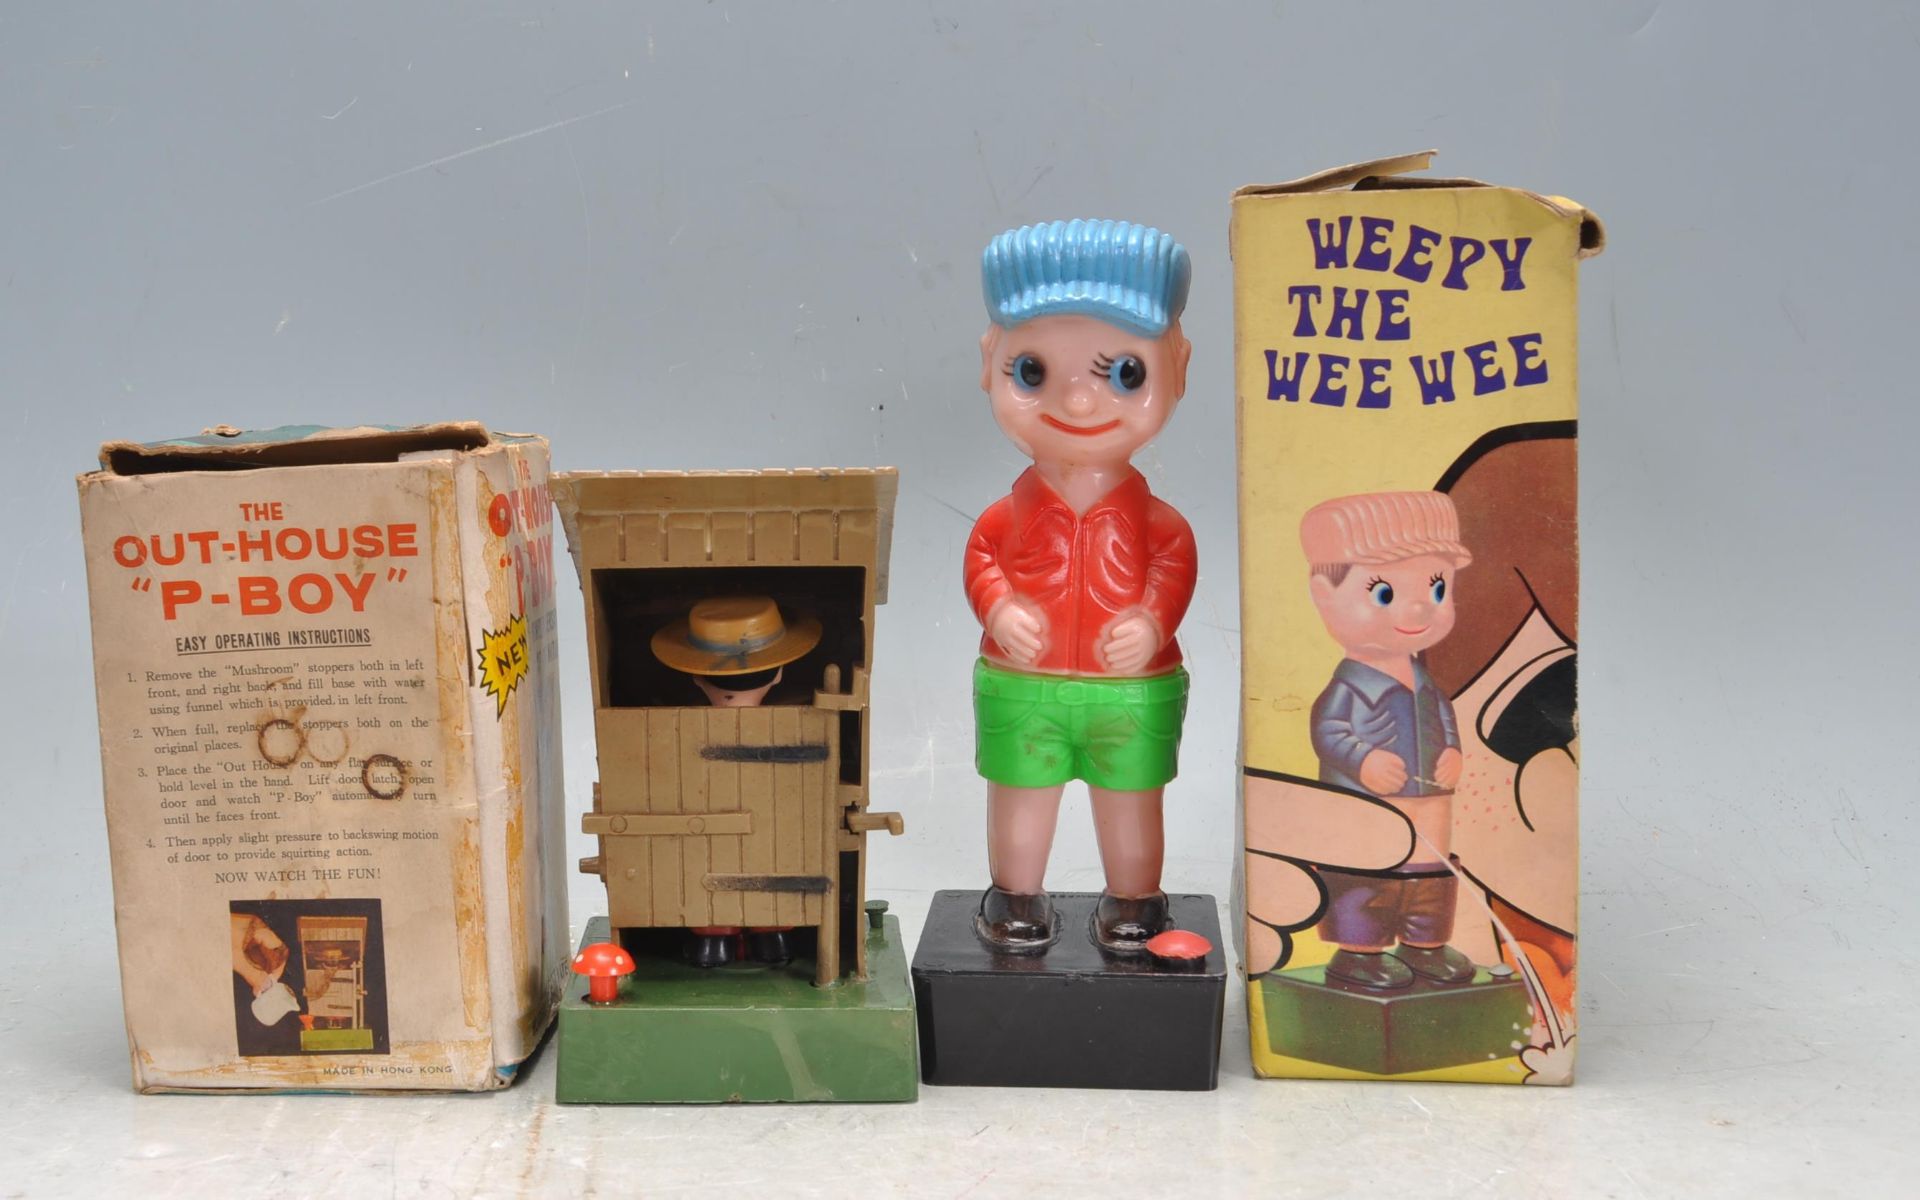 TWO VINTAGE 20TH CENTURY CHILDRENS TOYS